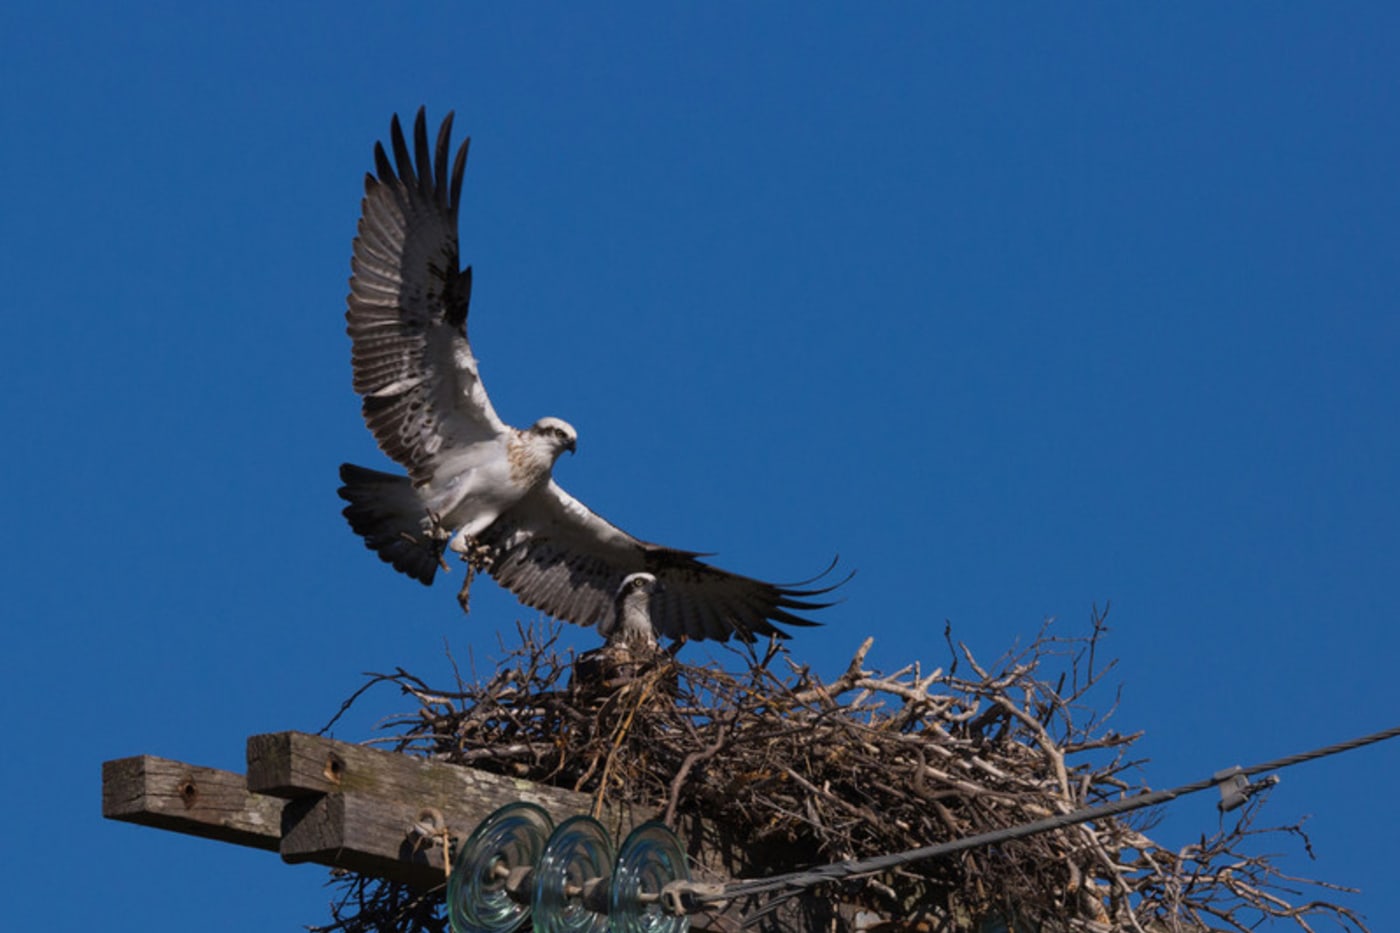 Two osprey (Pandion haliaetus) in a nest at Green Point, NSW - May 2015.